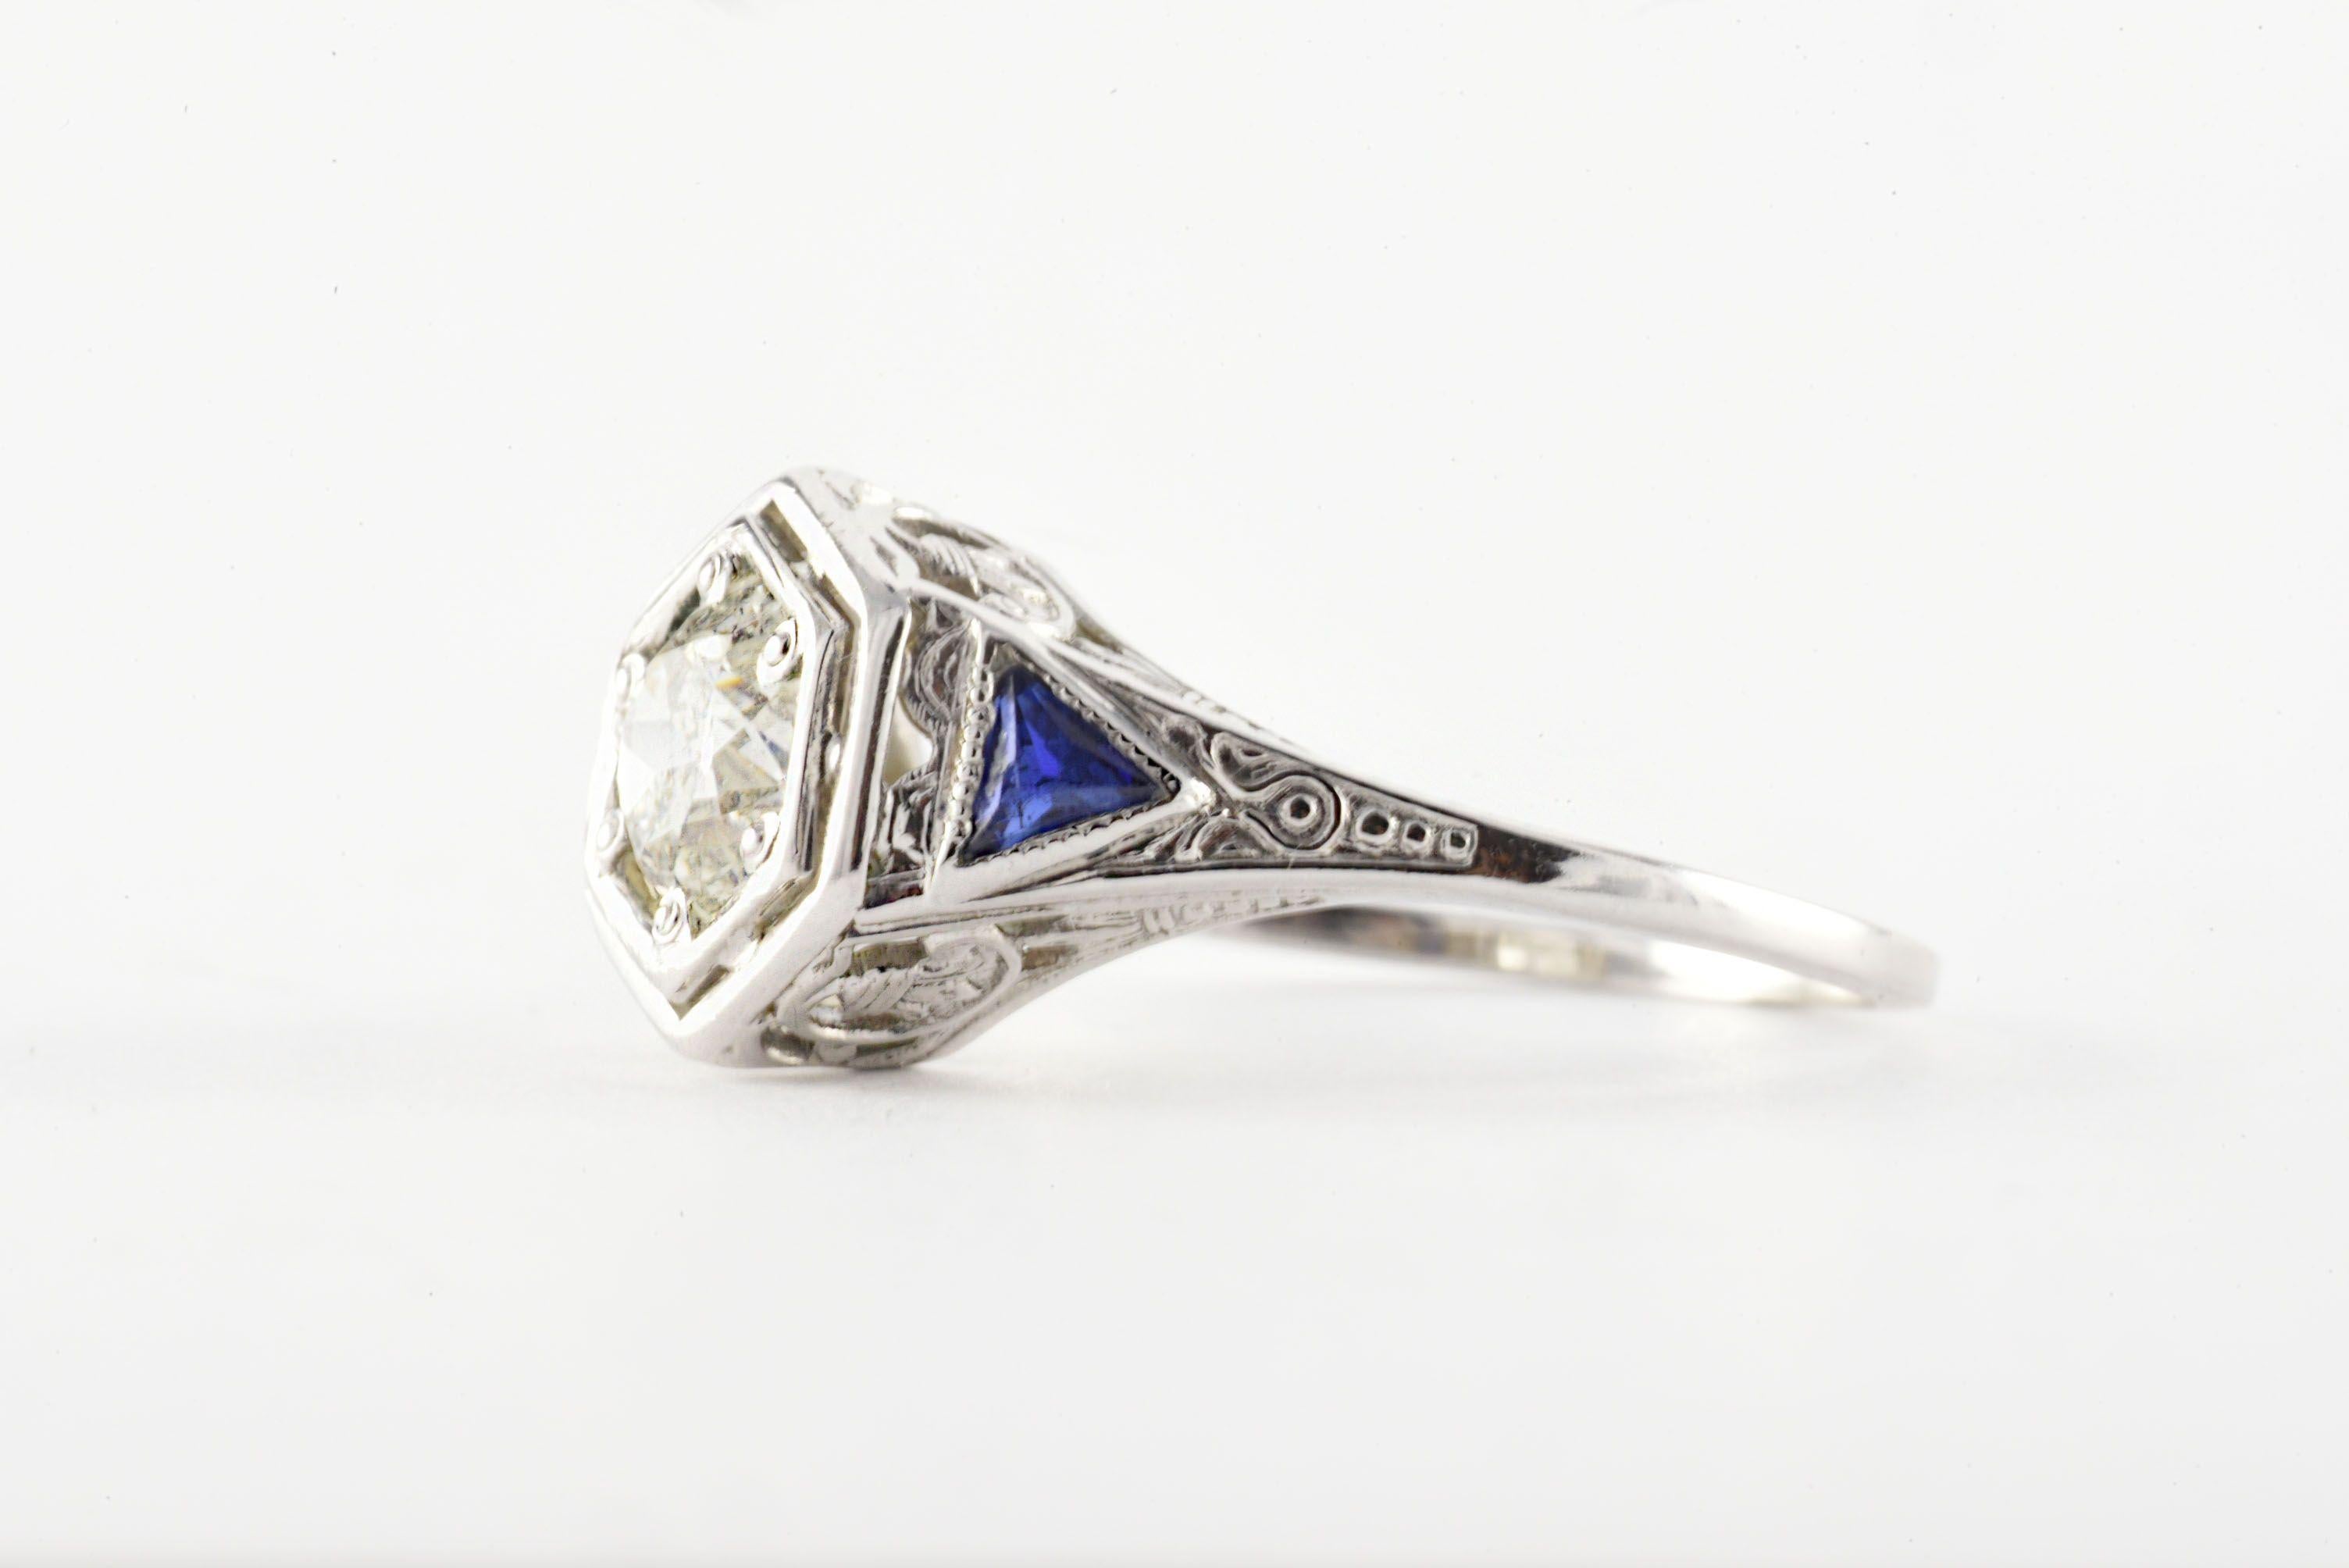 Crafted in the 1920-30s from 18kt white gold, this Art Deco gem features a bold Old European cut diamond measuring approximately 0.75 carats, H-I color, I1 clarity, and complemented with two matching trillion blue sapphires and intricate filigree. 
